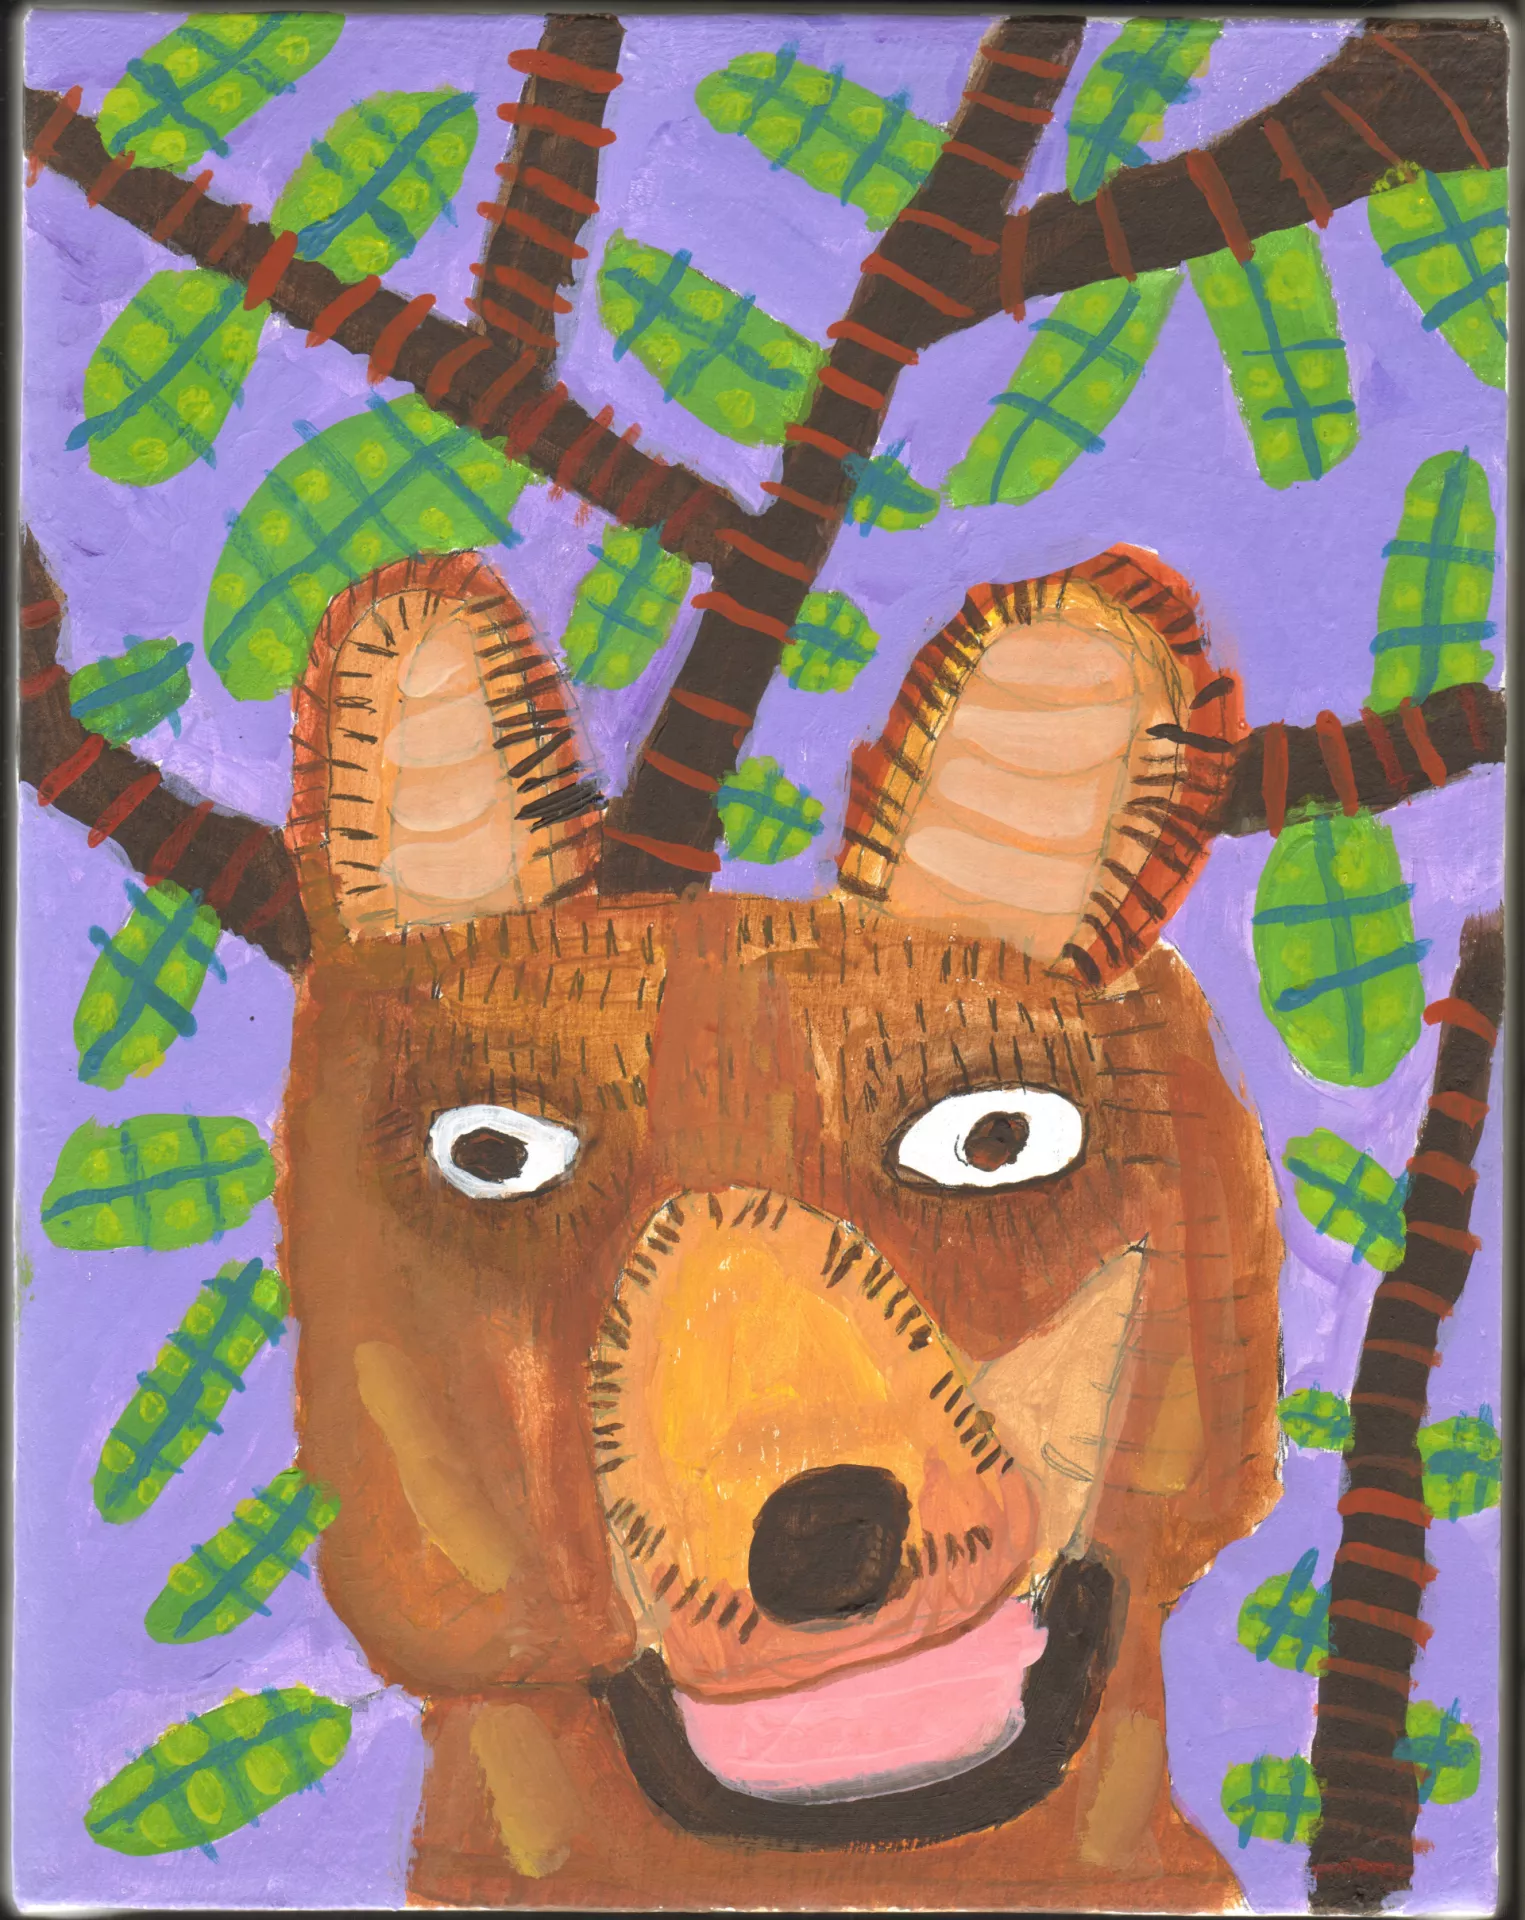 Robert Kawough Bear with the Trees, 2022 The smiling face of a brown bear surrounded by leafy tree branches, all against a purple background.  Acrylic on canvas, 11" x 14"